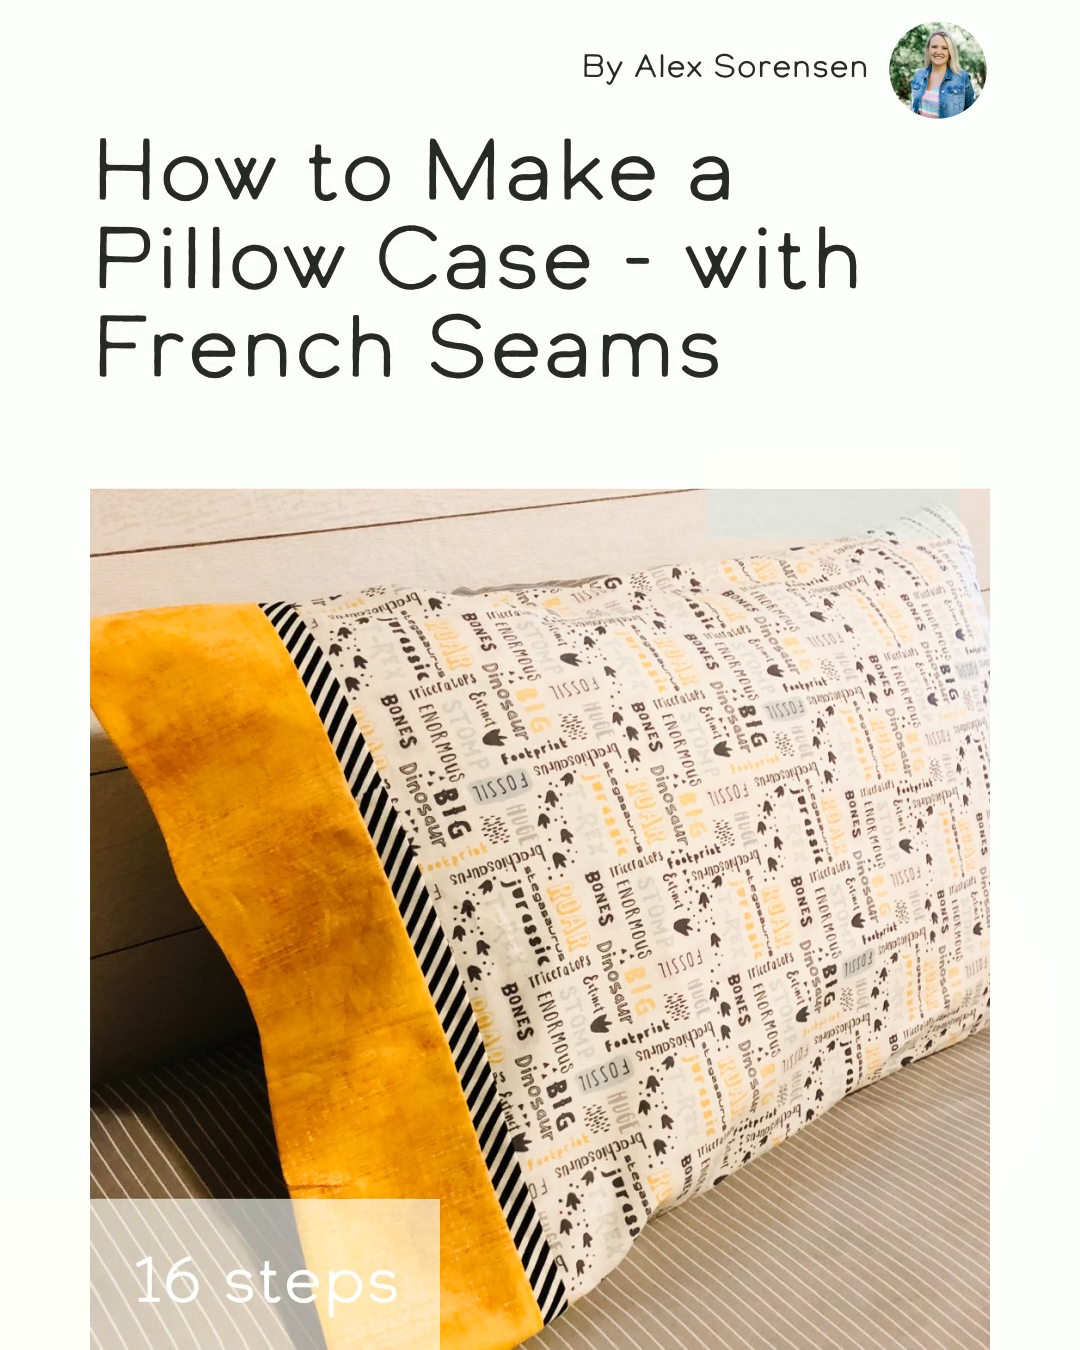 How To Make A Pillow Case - With French Seams - How To Make A Pillow Case - With French Seams -   19 diy Pillows case ideas